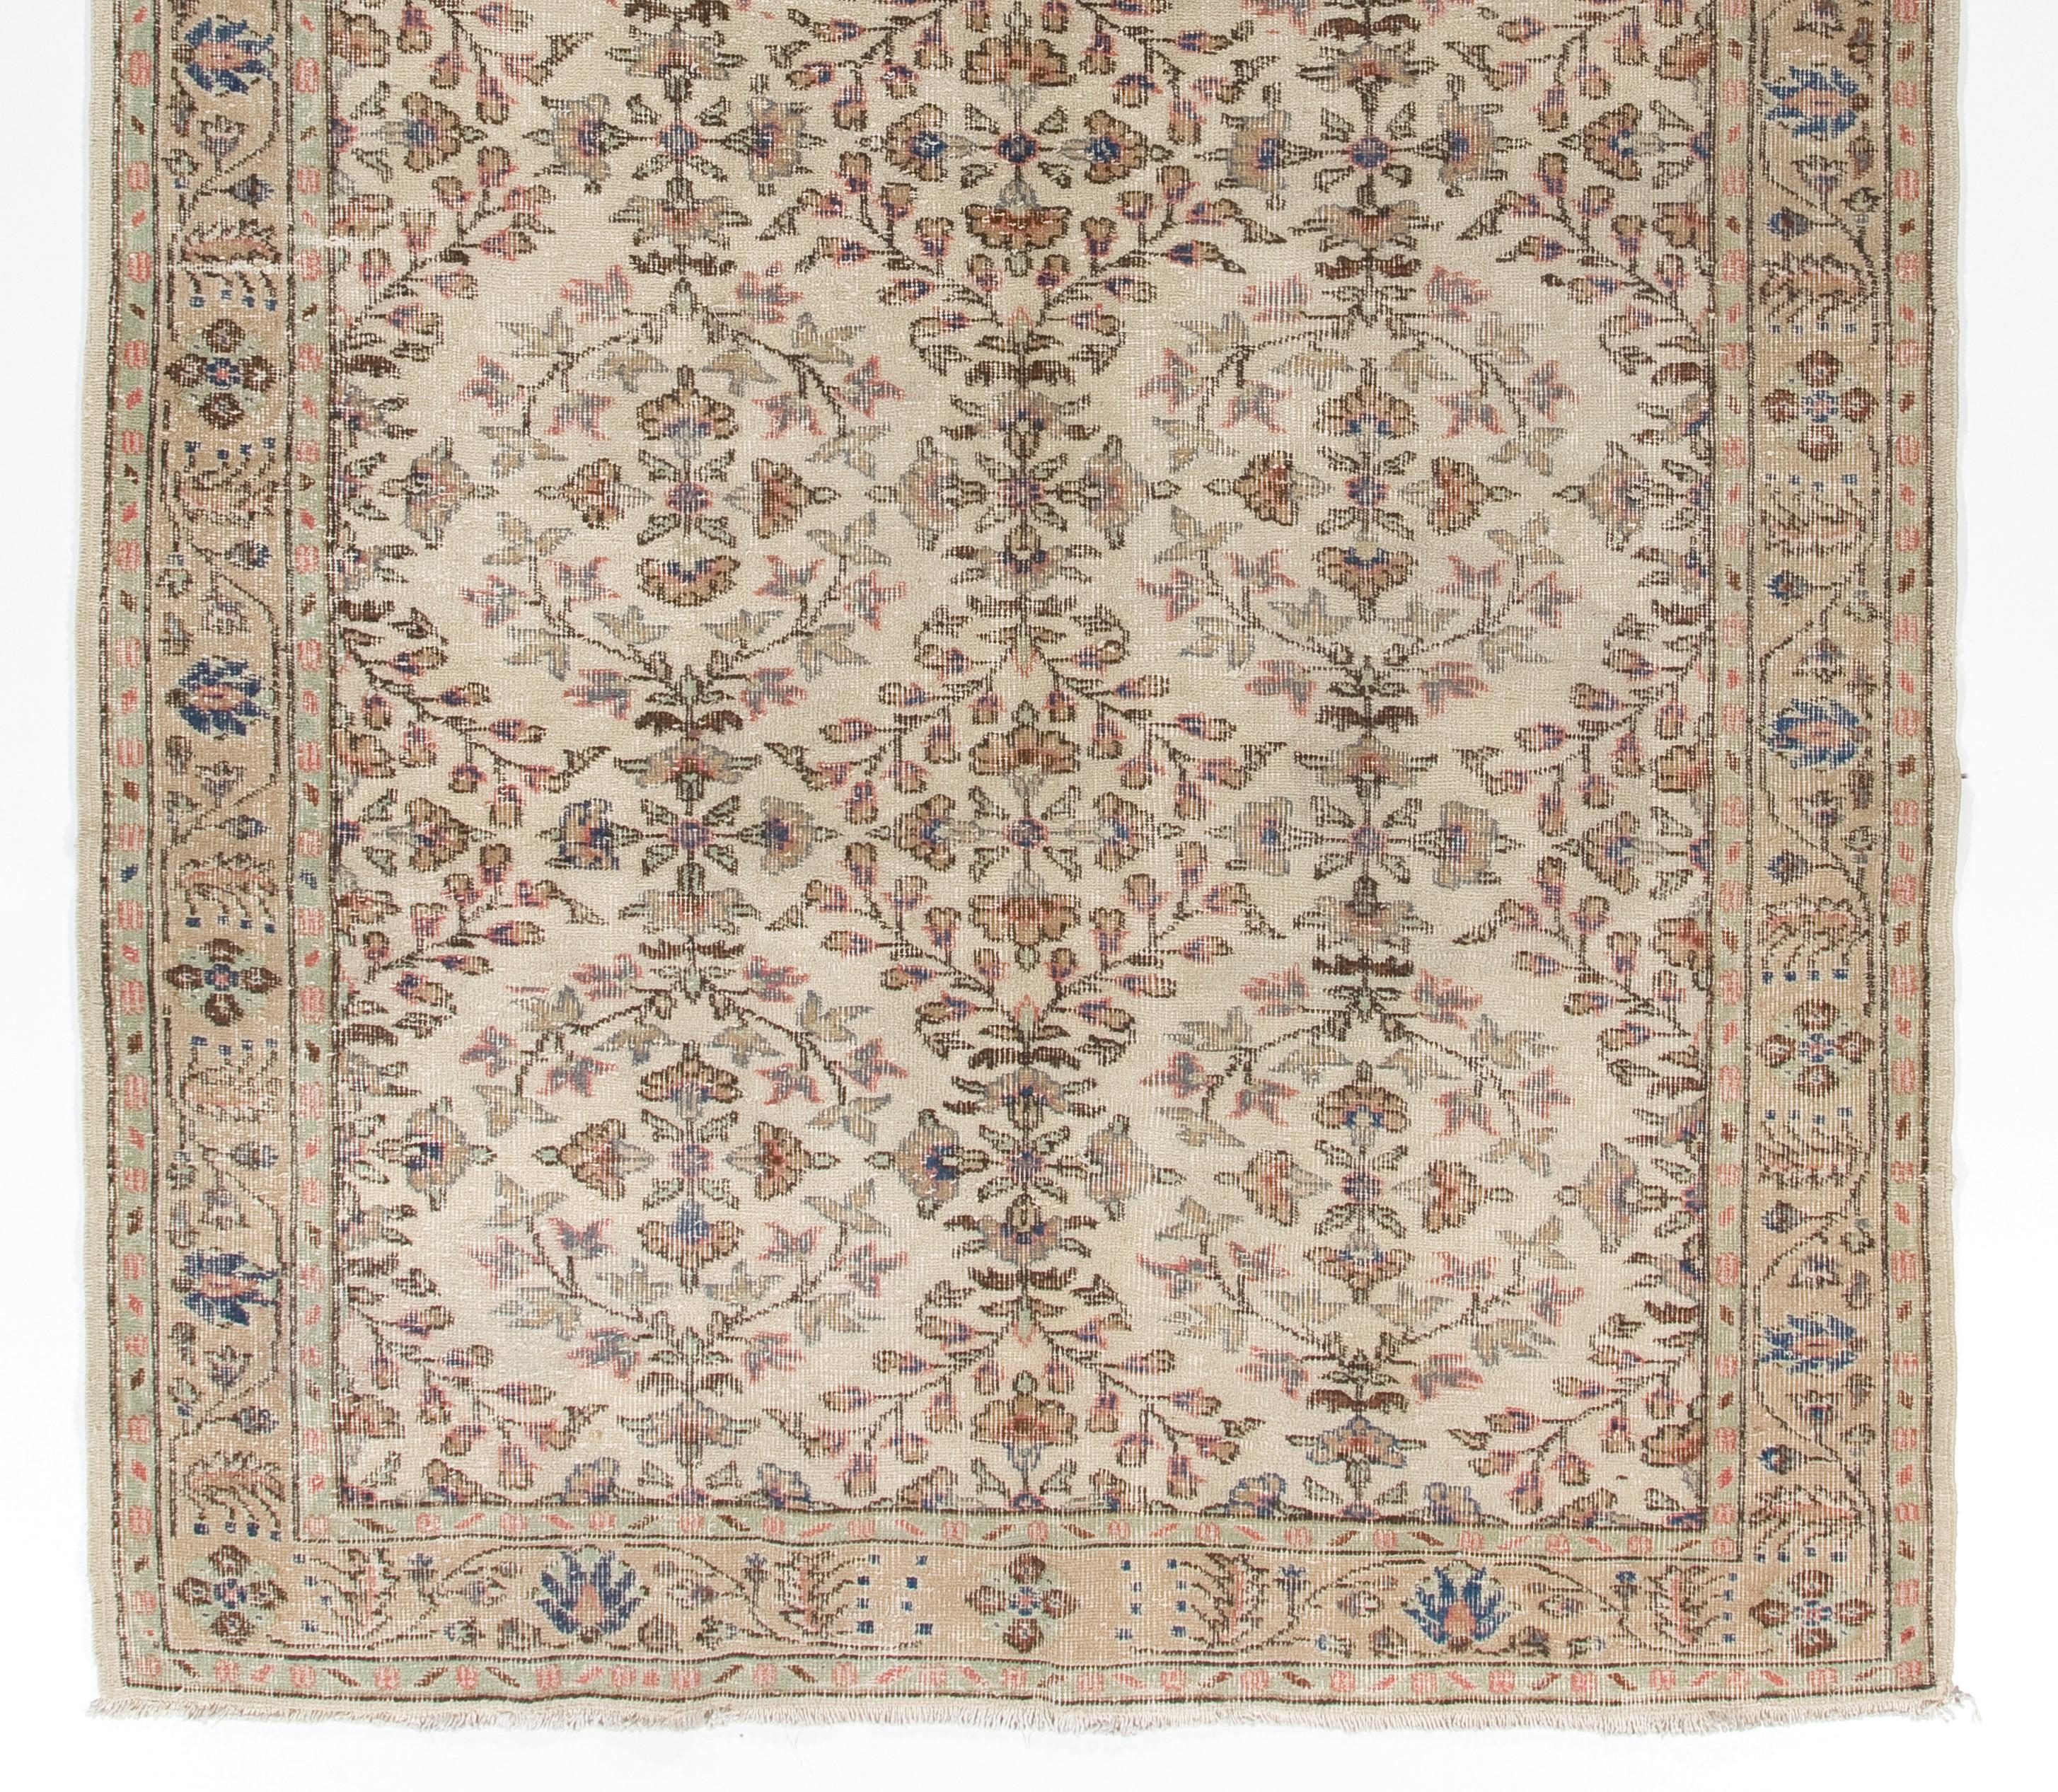 Turkish 6x9 Ft Vintage Oushak Area Rug in Soft, Muted Colors, Wool Hand Knotted Carpet For Sale